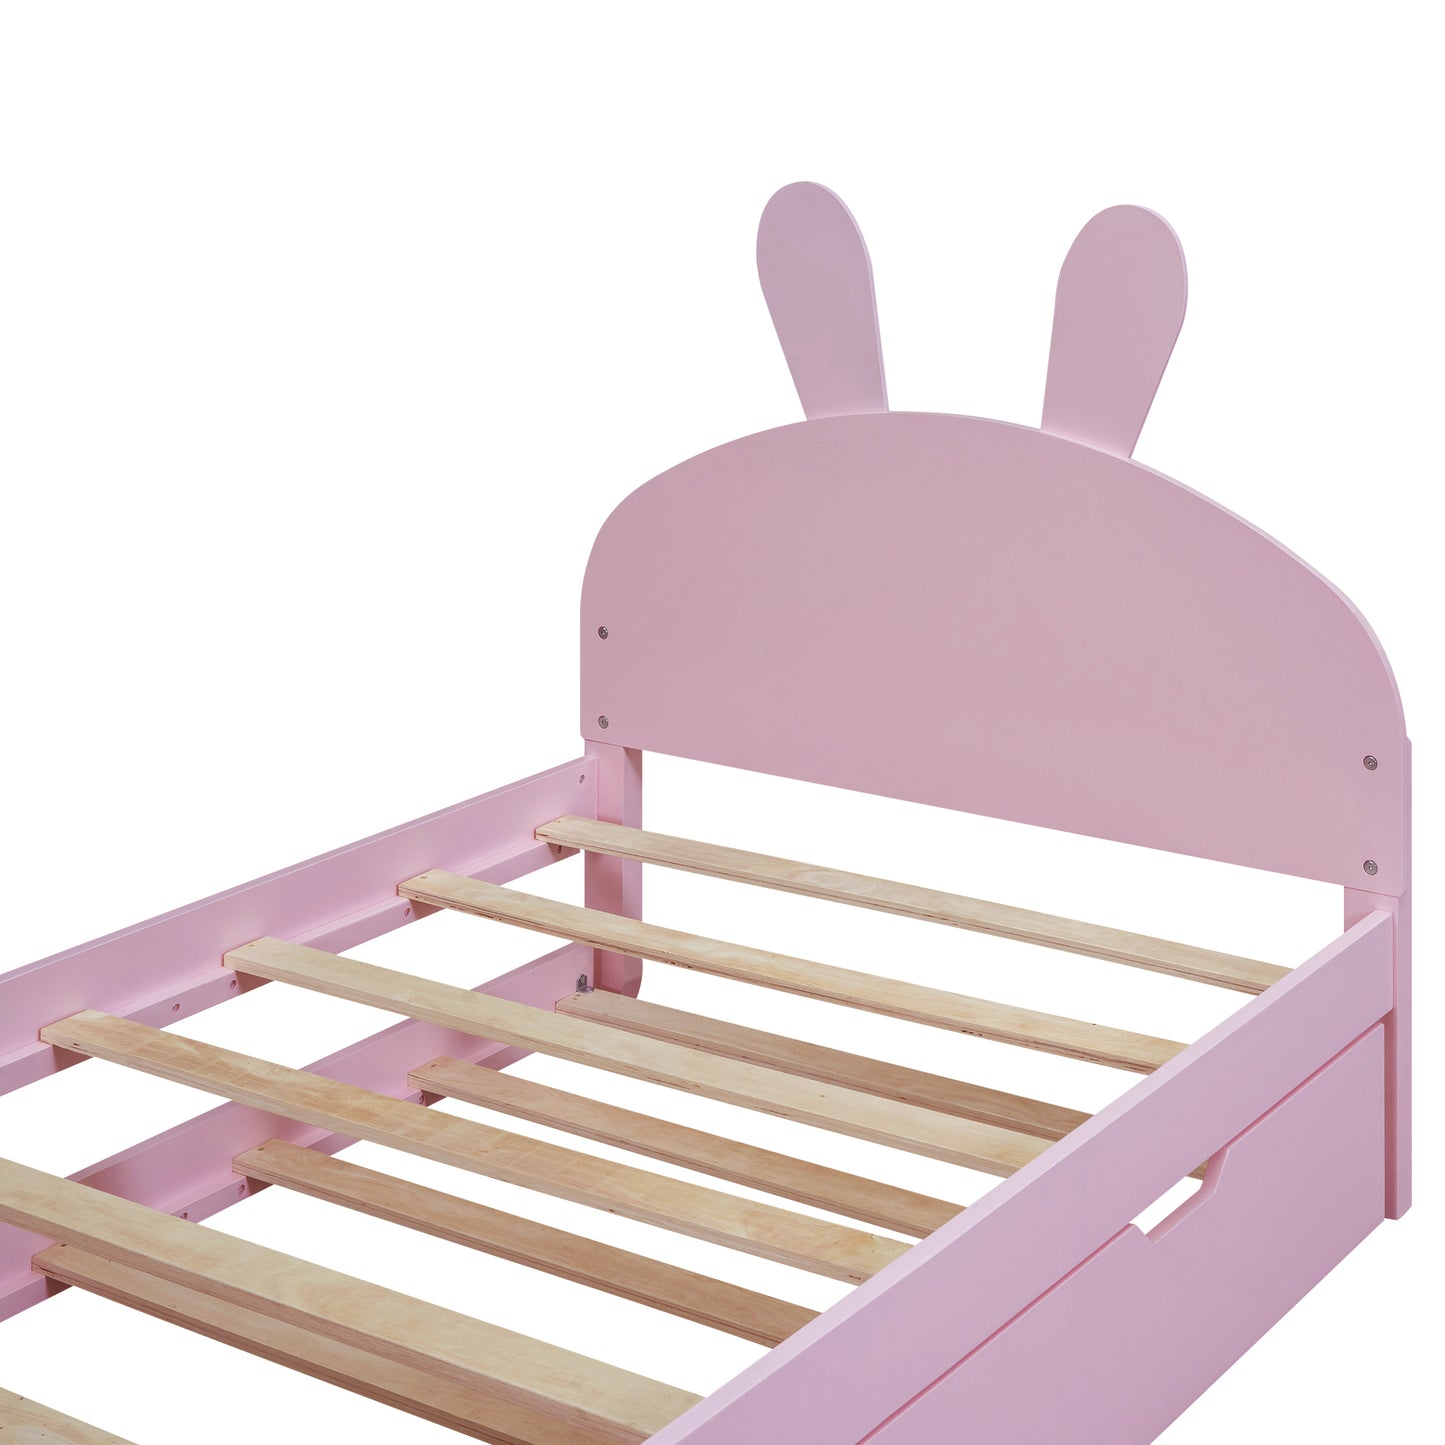 Wood Twin Size Platform Bed with Cartoon Ears Shaped Headboard and Trundle, Pink